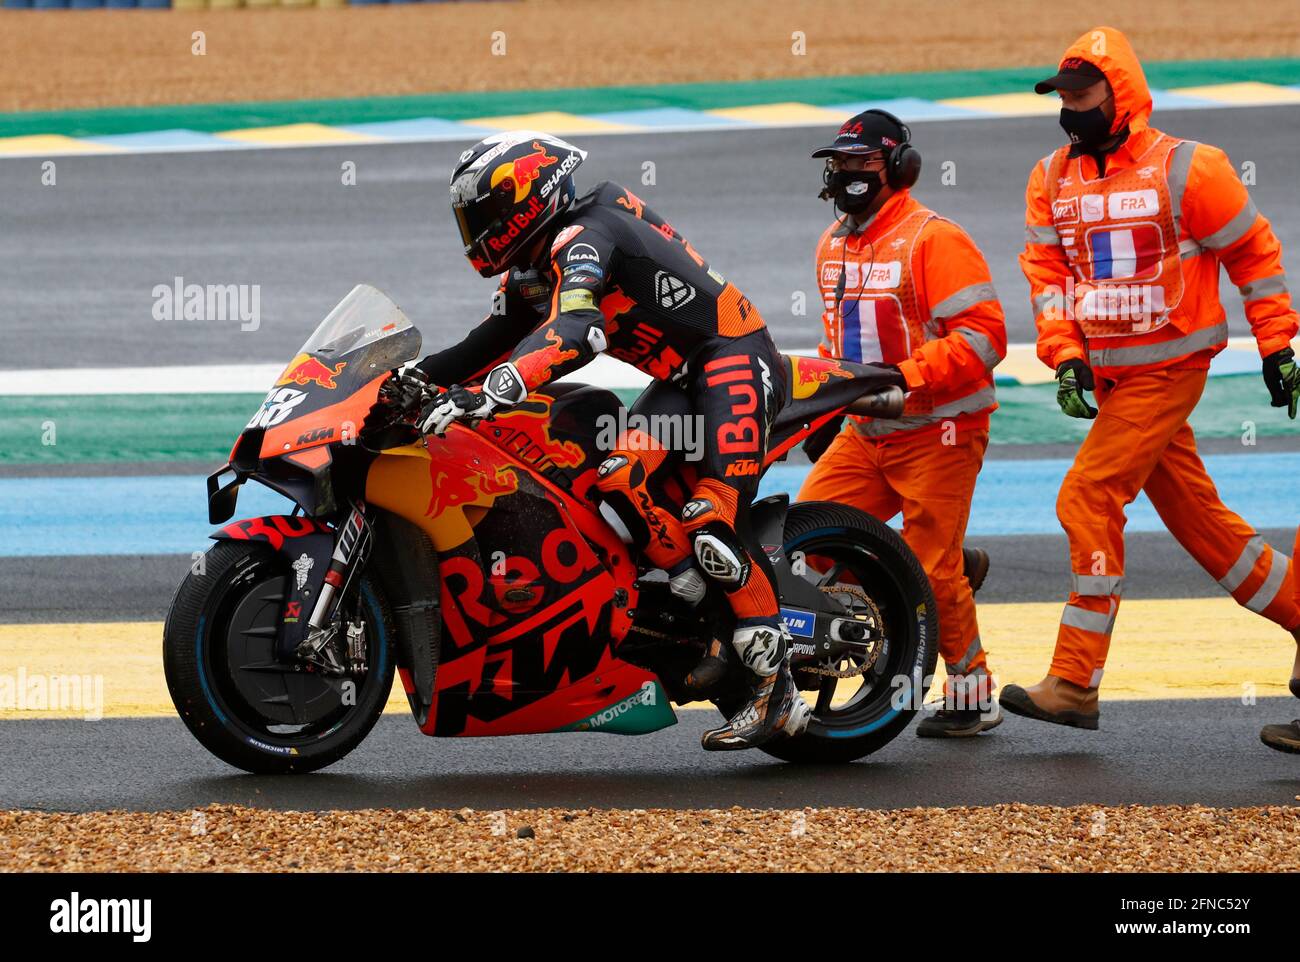 MotoGP - French Grand Prix - Circuit Bugatti, Le Mans, France - May 16,  2021 Red Bull KTM Factory Racing's Miguel Oliveira is helped by stewards  during the MotoGP race REUTERS/Stephane Mahe Stock Photo - Alamy